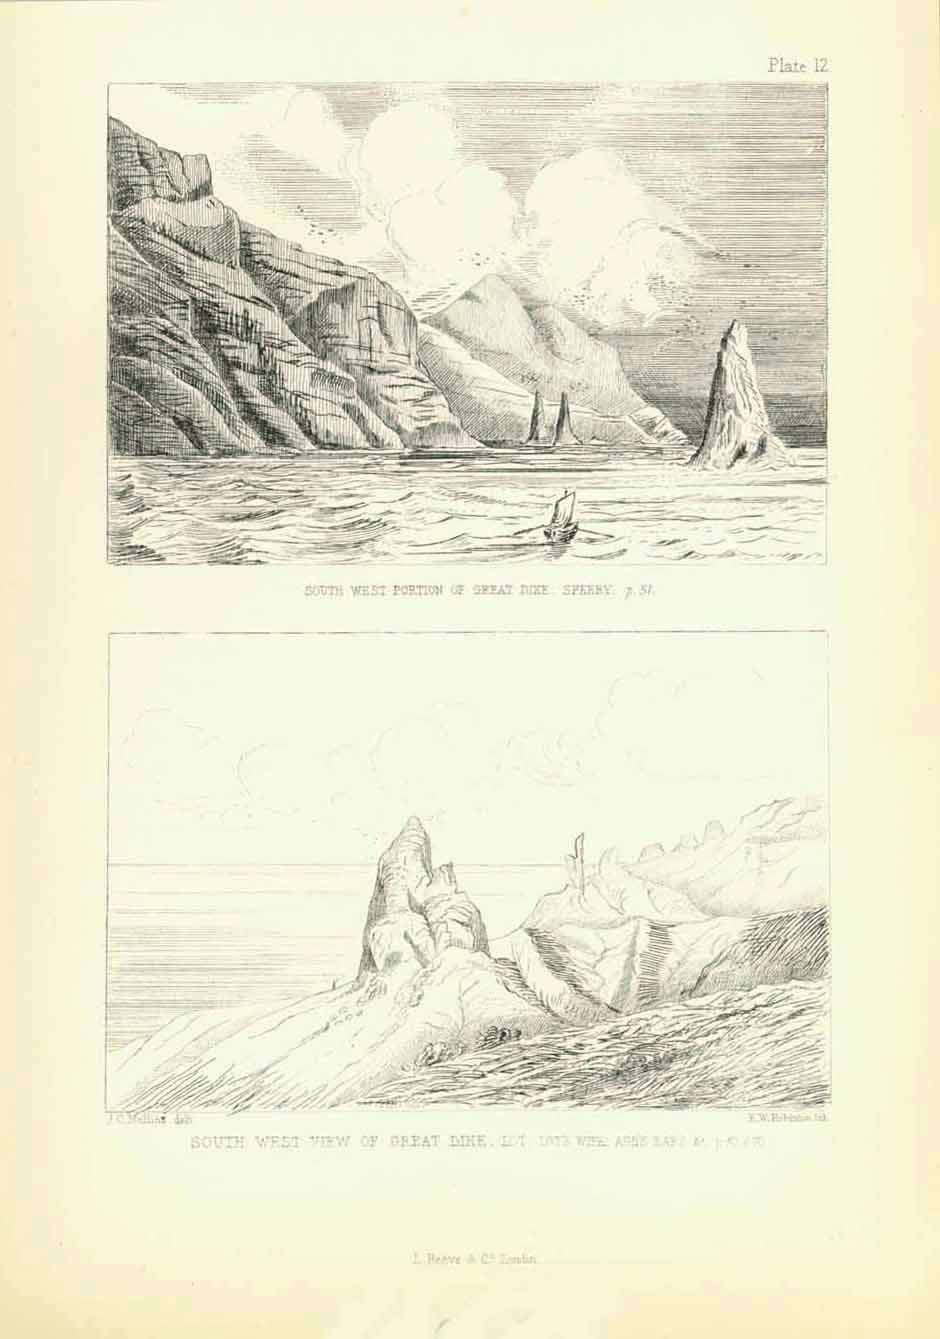 Upper image: South West Portion of Great Dike Speery Lower image: South West View of Great Dike , Lot, Lot's Wife, Ass's Ears  Lithograph by E. W. Robomson.